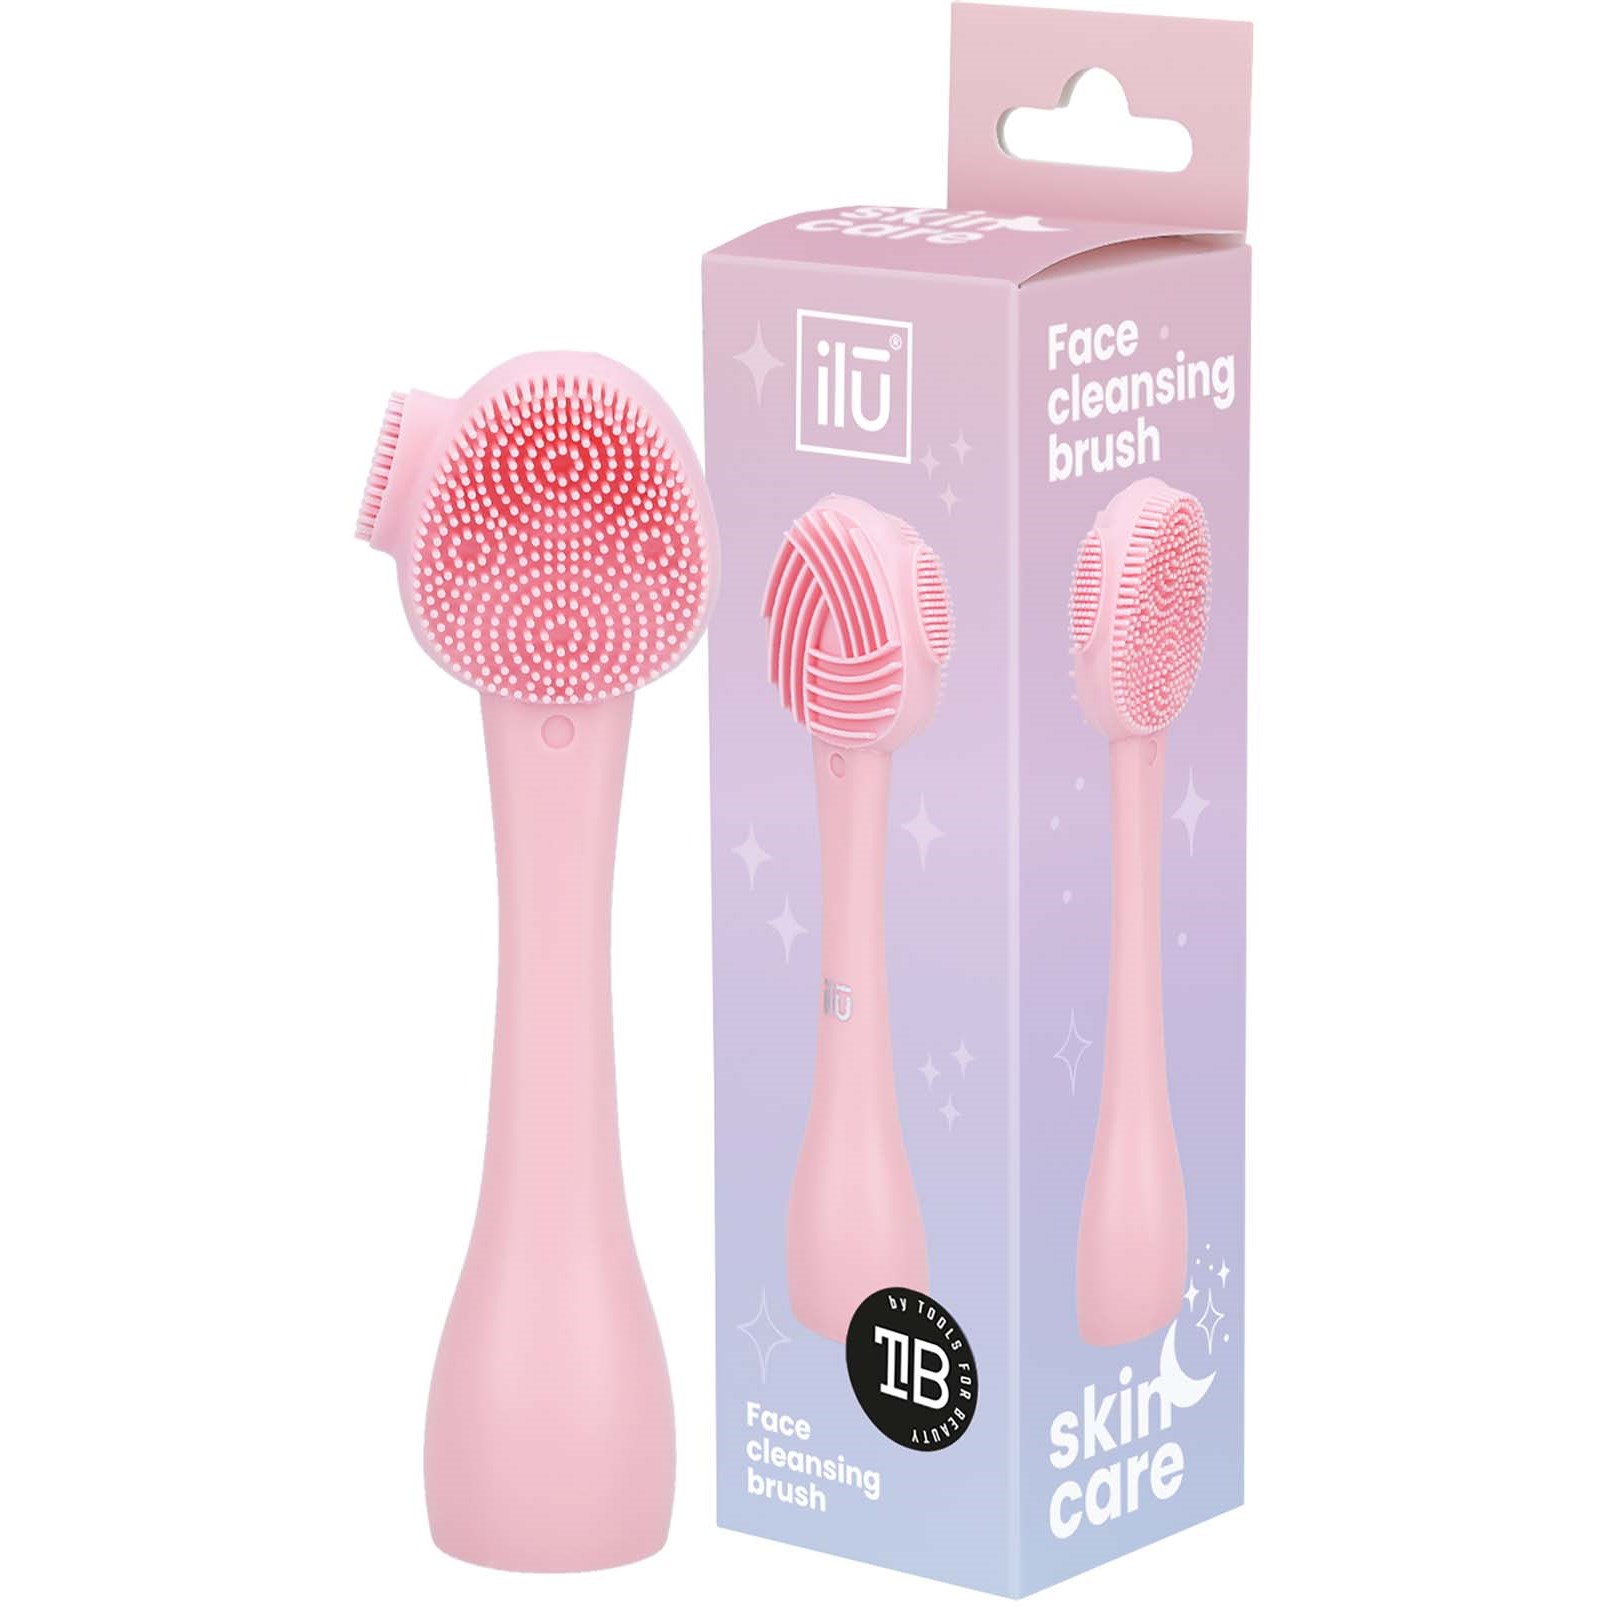 ilū Spa & Skincare Face Cleansing Brush Pink